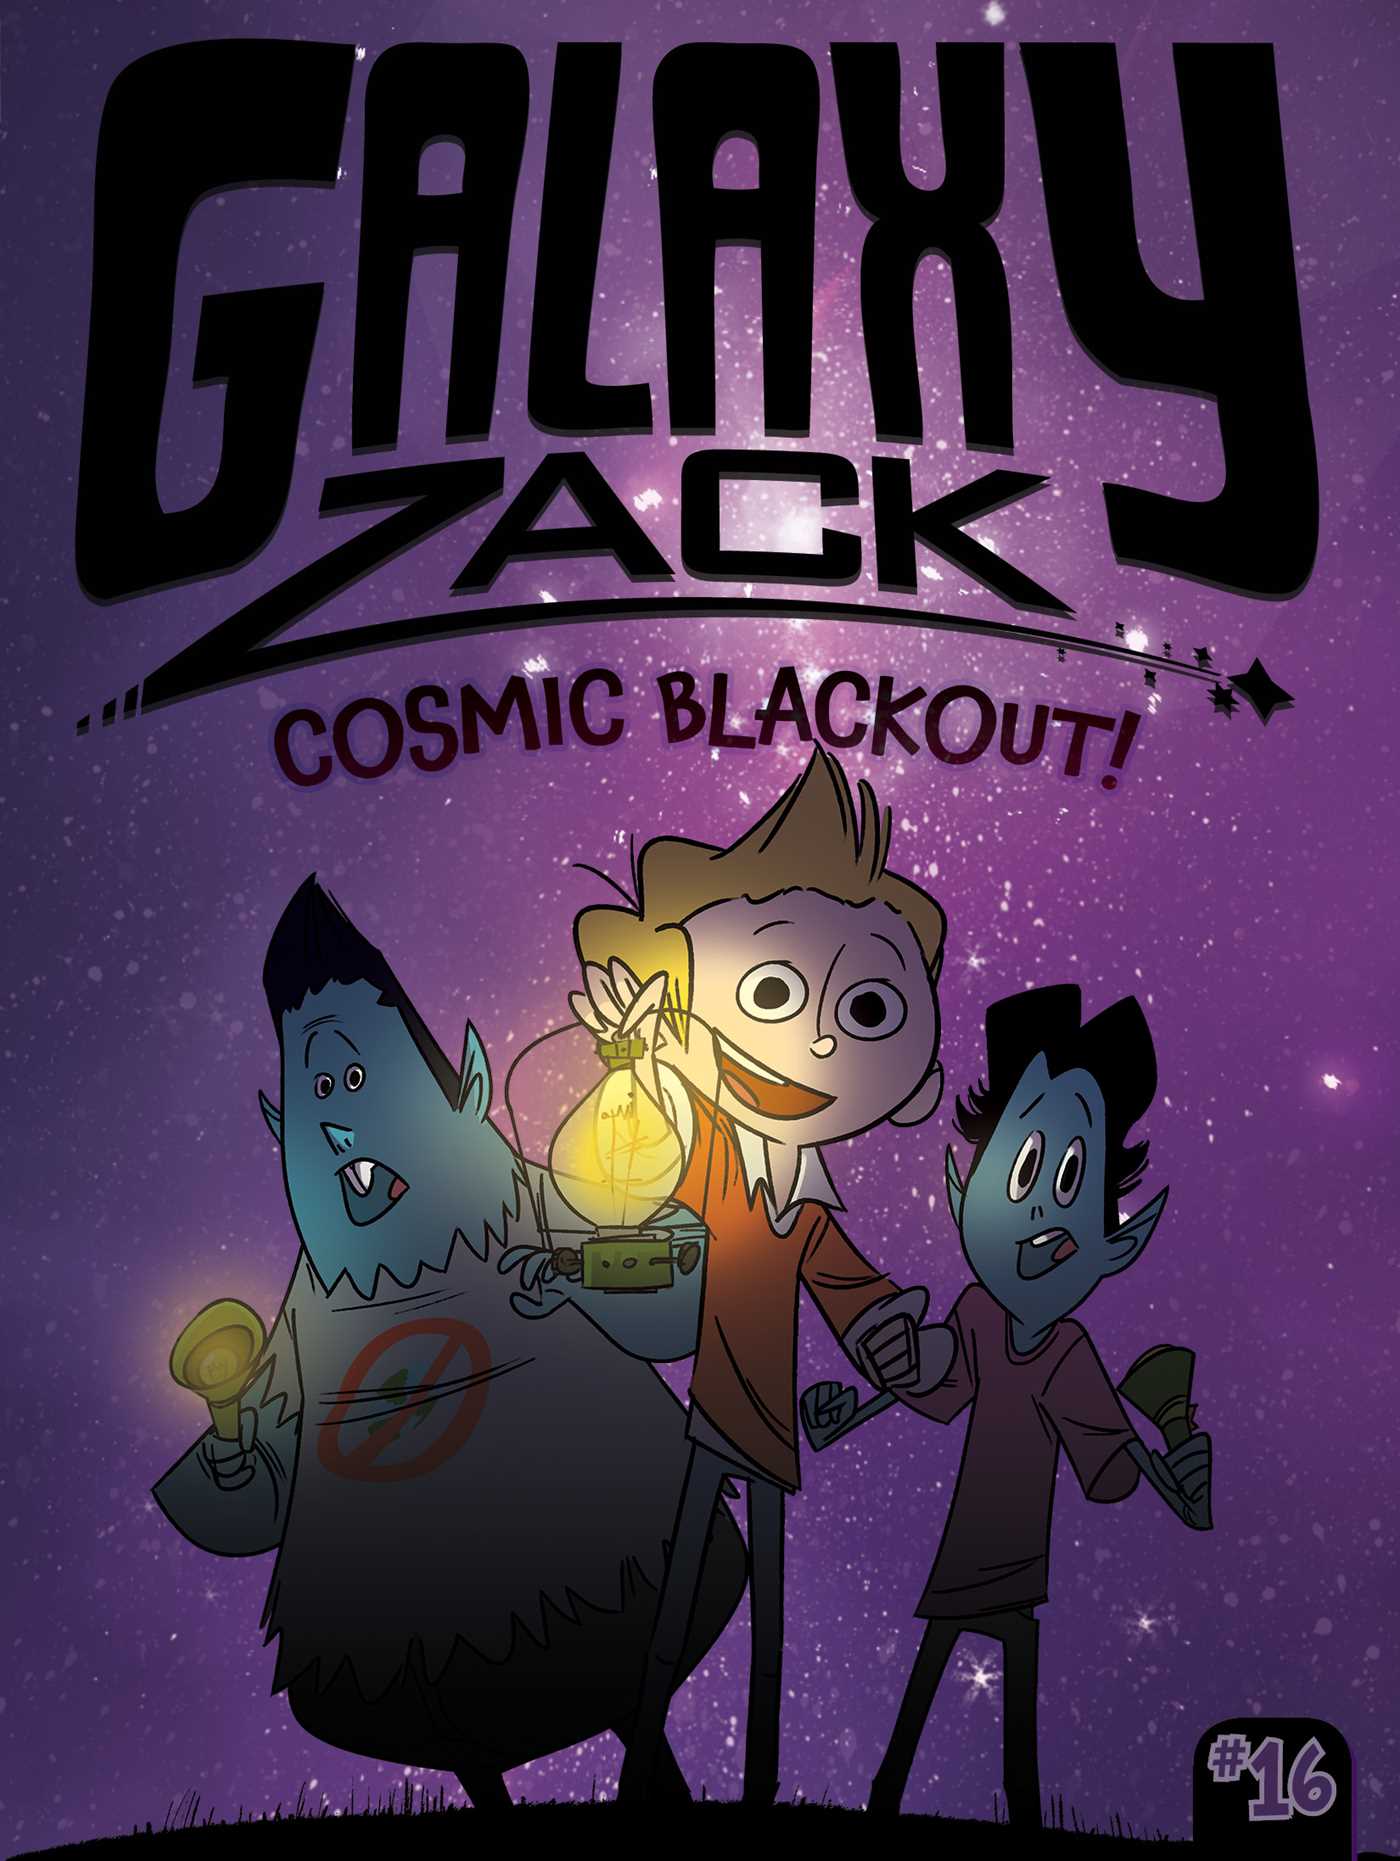 Cosmic blackout! cover image